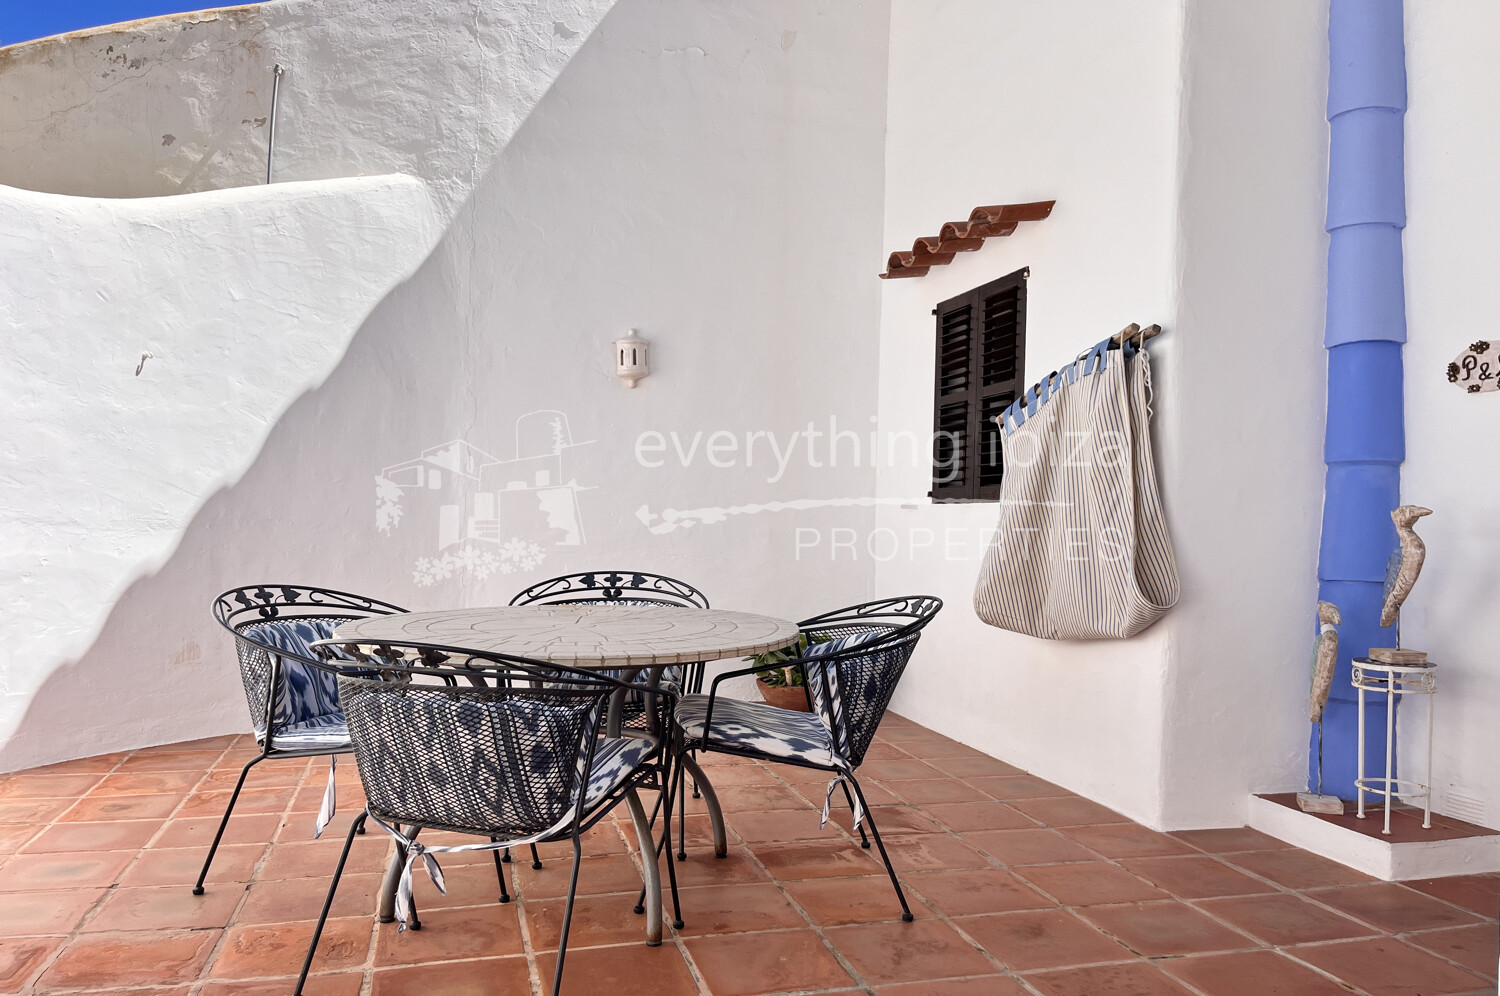 Charming Traditional Townhouse Close to Cala Conta with Sea and Sunset Views, ref. 1689, on sale in ibiza by everything ibiza Properties